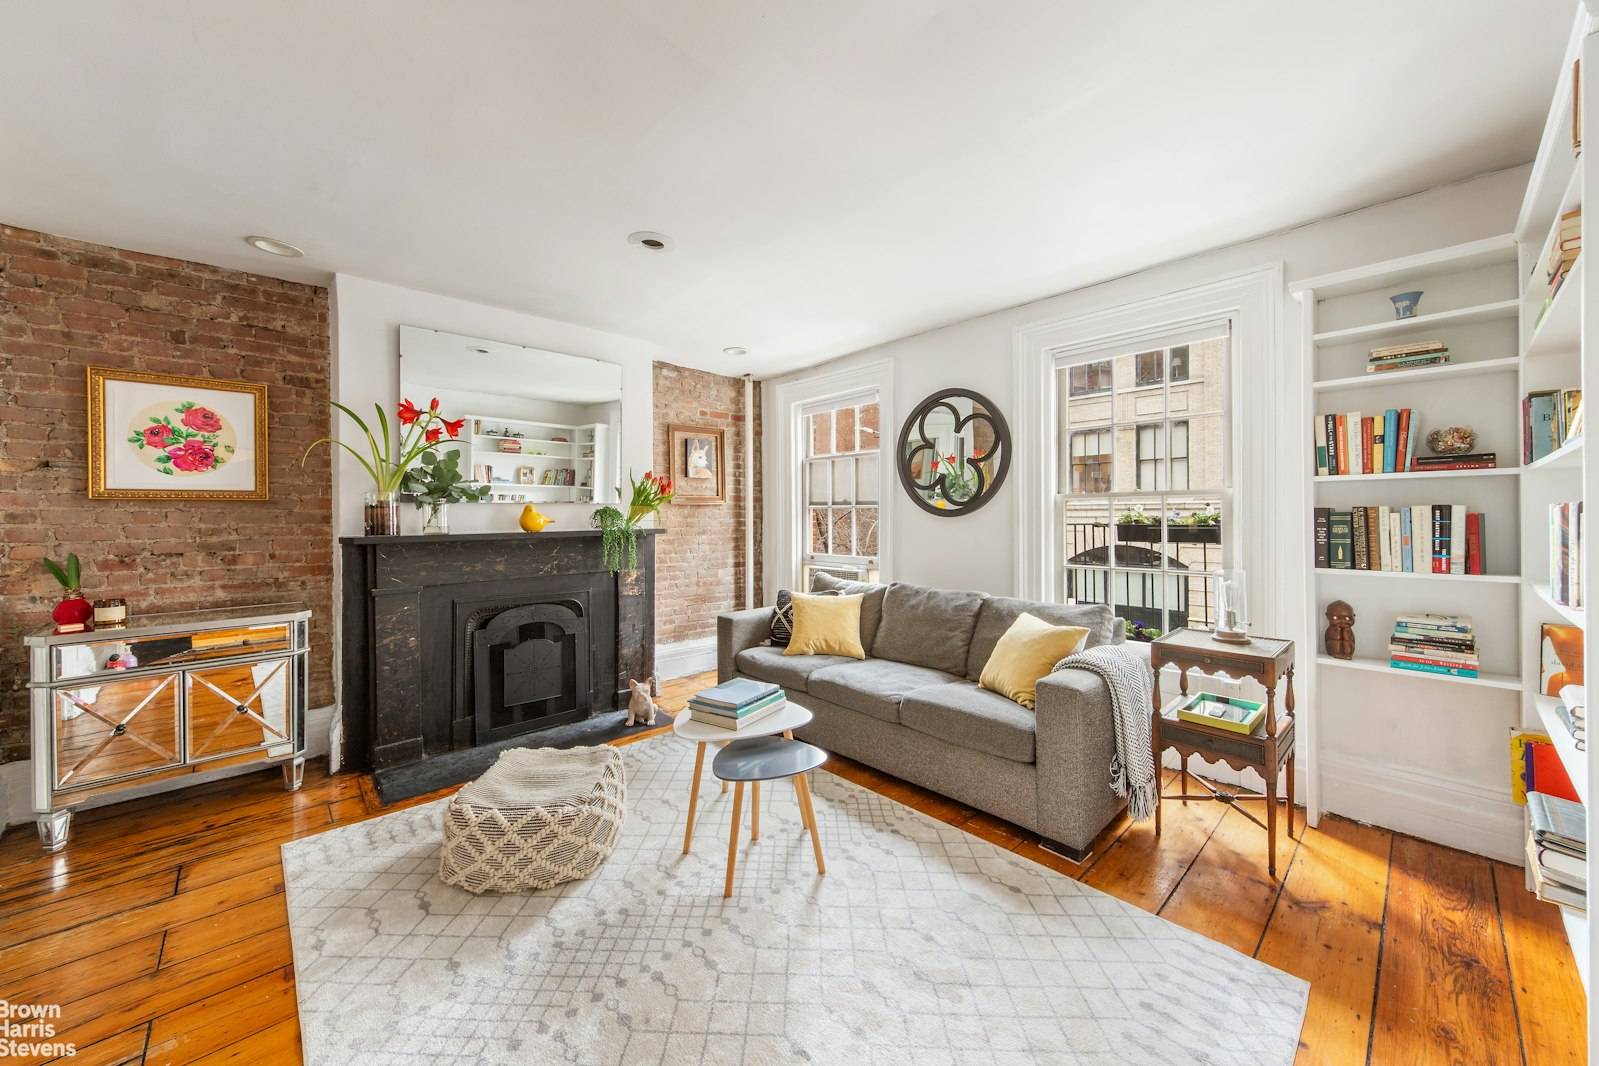 A Greenwich Village Historic District gem, this alcove studio is located in a converted pre Civil War mansion.